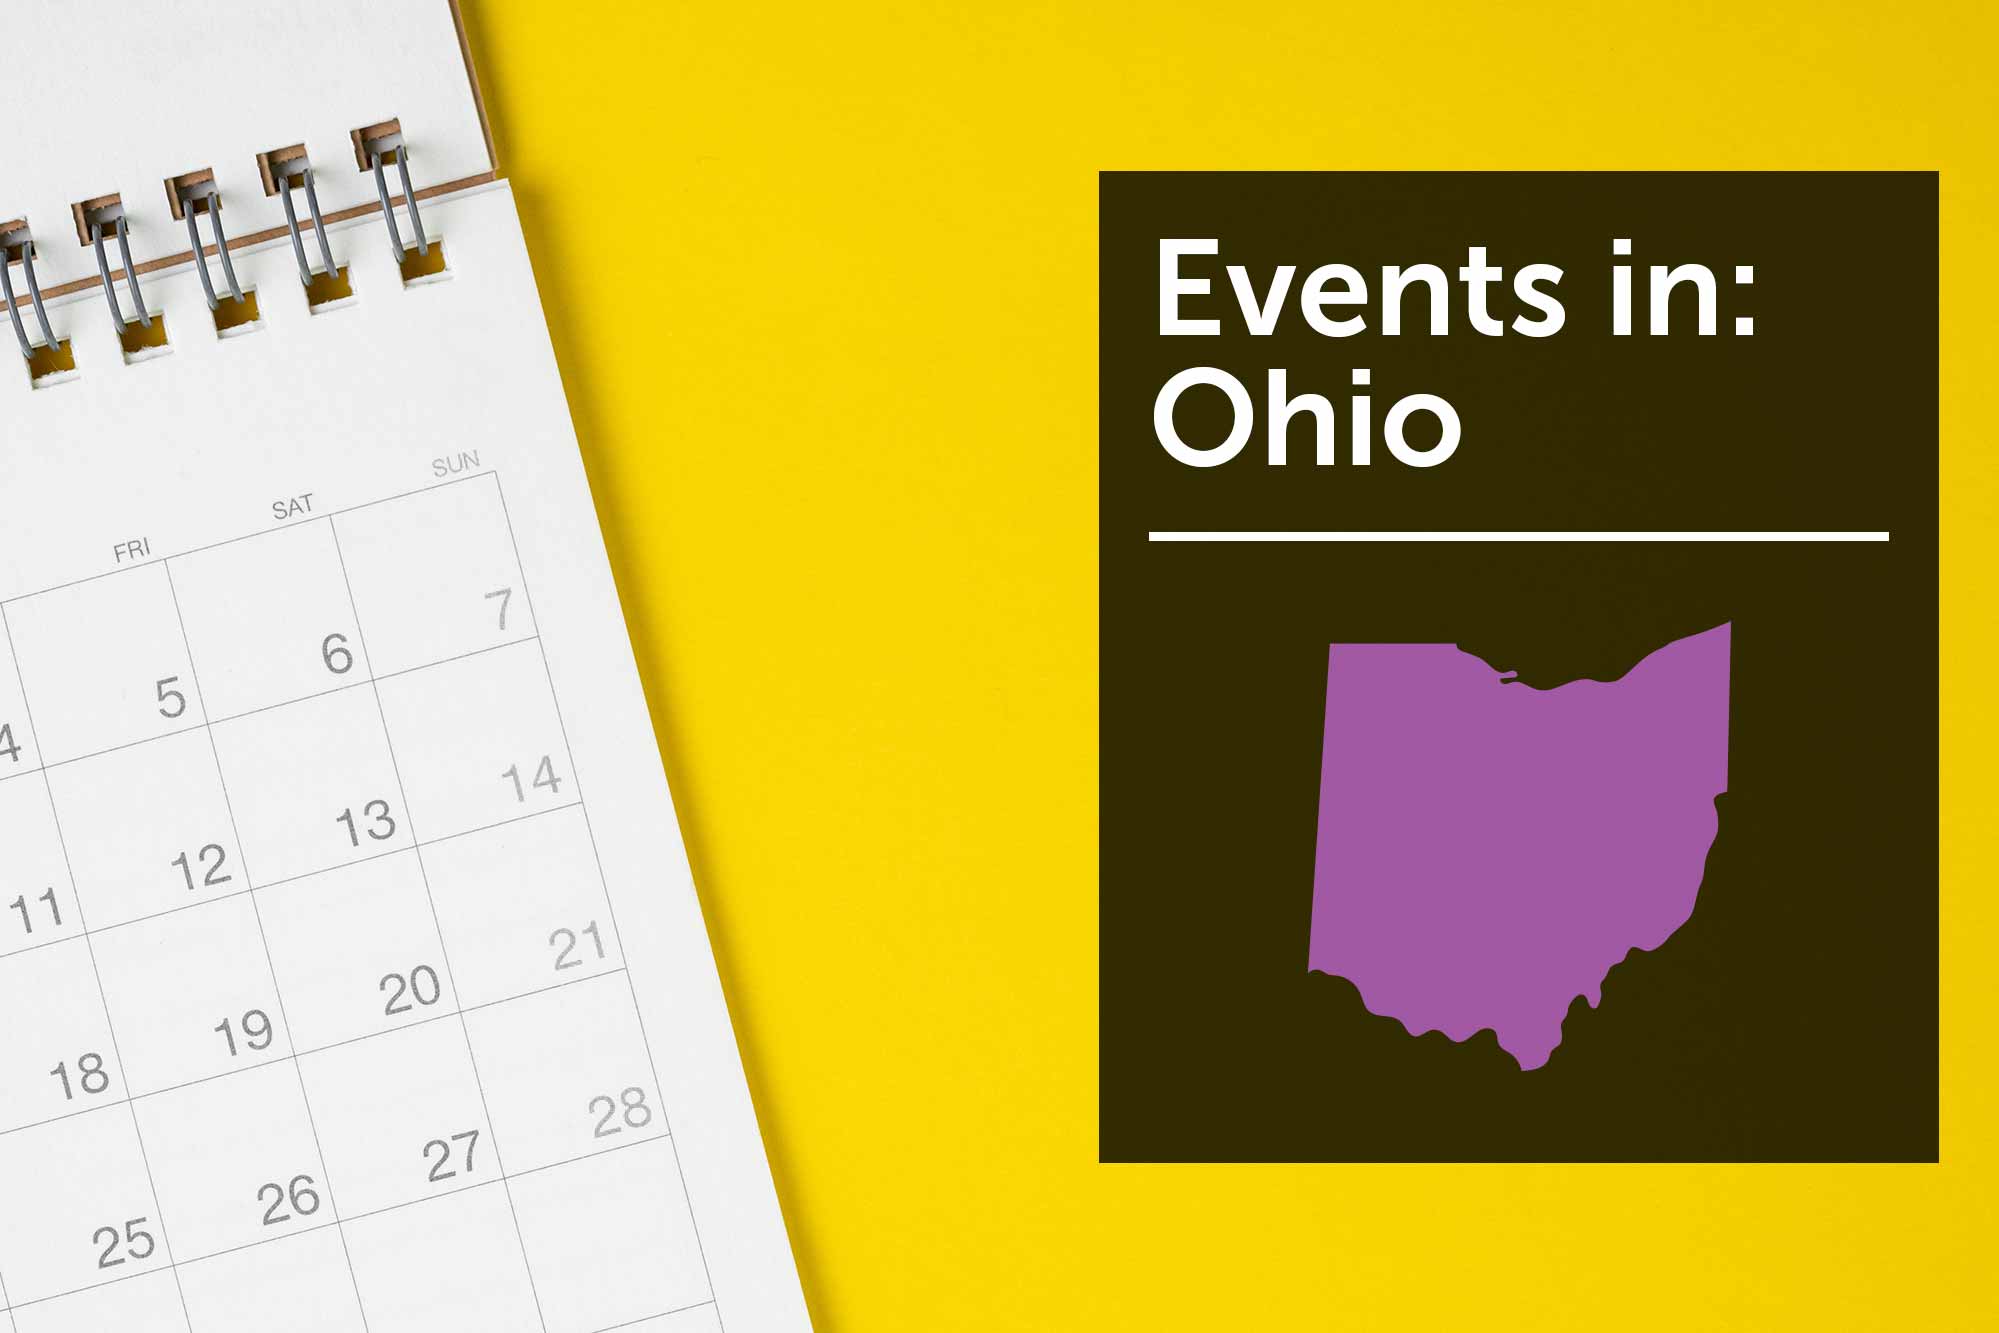 Women's business events in Ohio